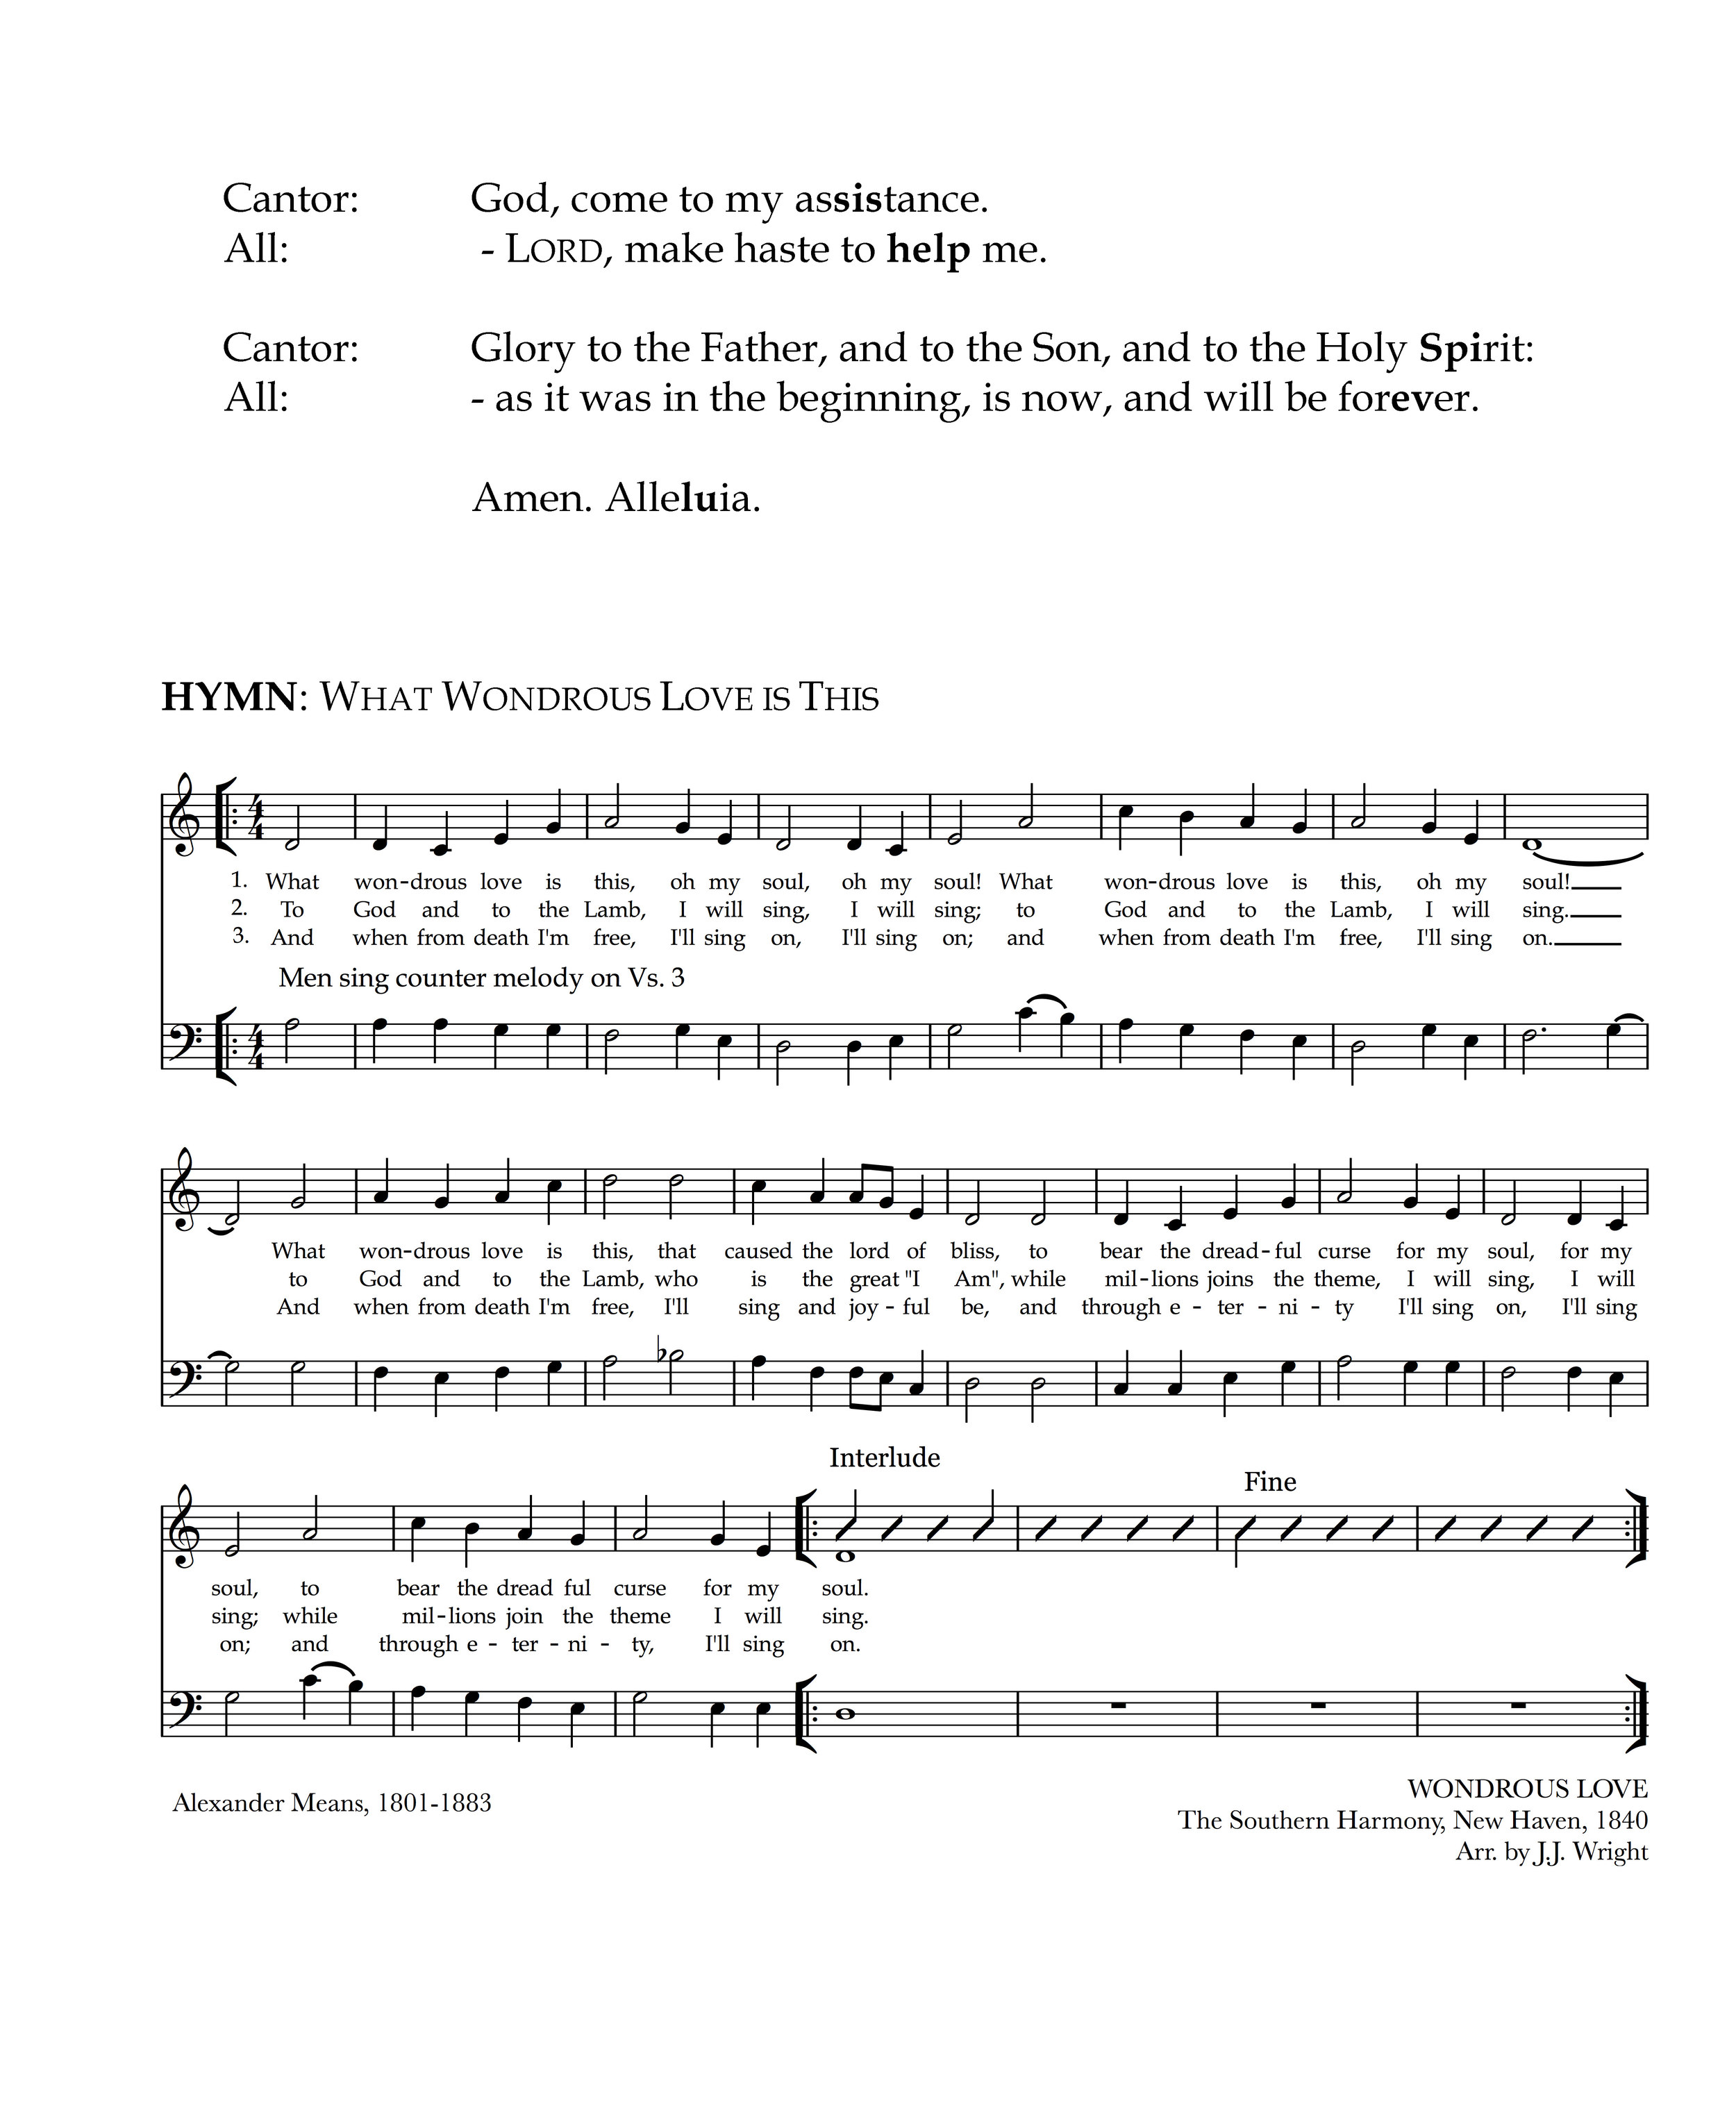 Transfiguration Vespers Program.pages in order_Page_03.jpg